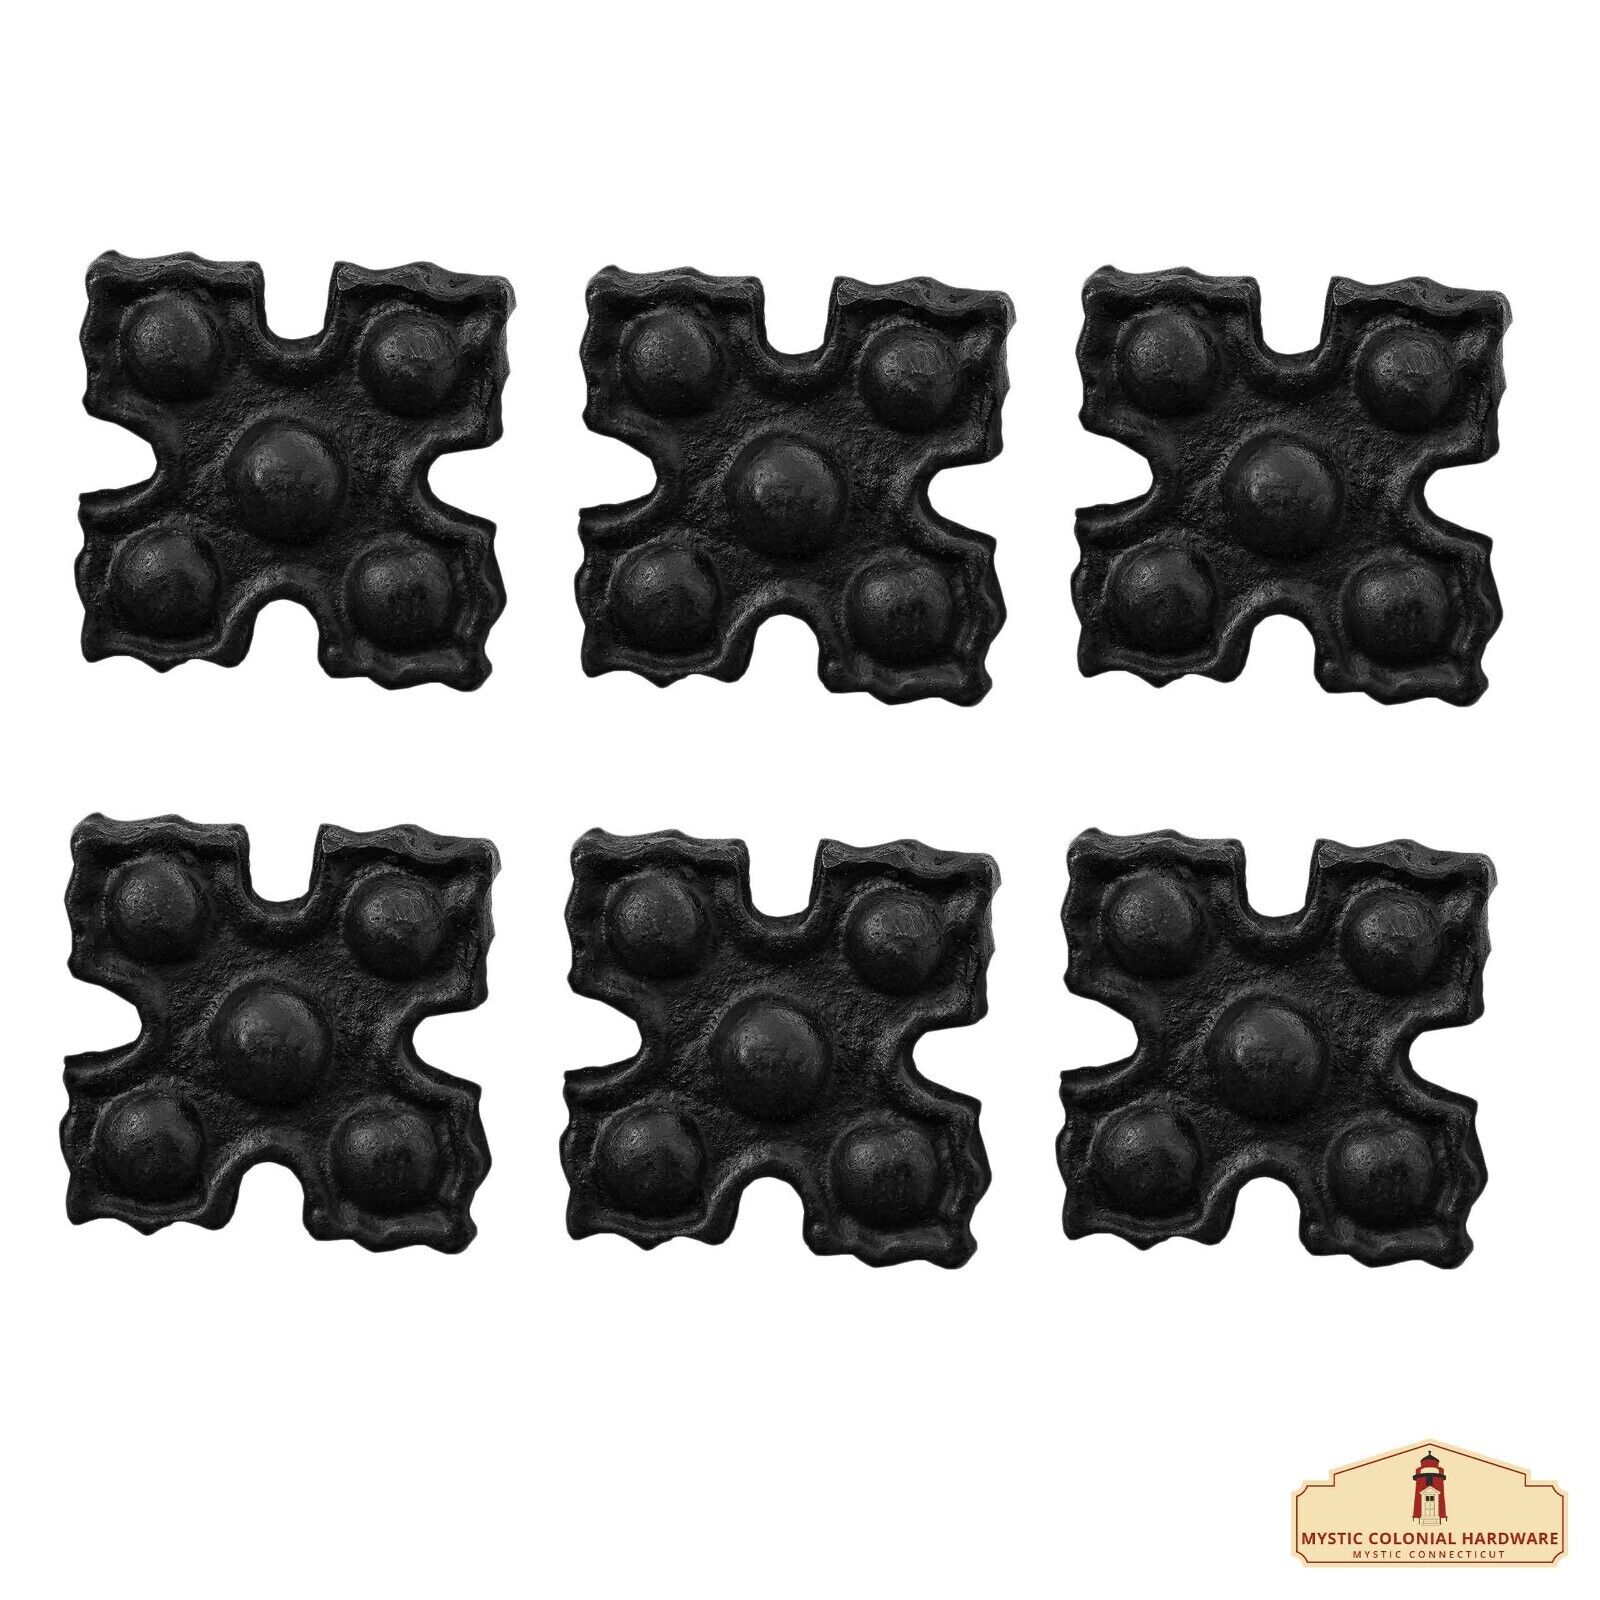 Decoration Nails Cast Iron Hardware Fully Functional Accessory Small Set of 6